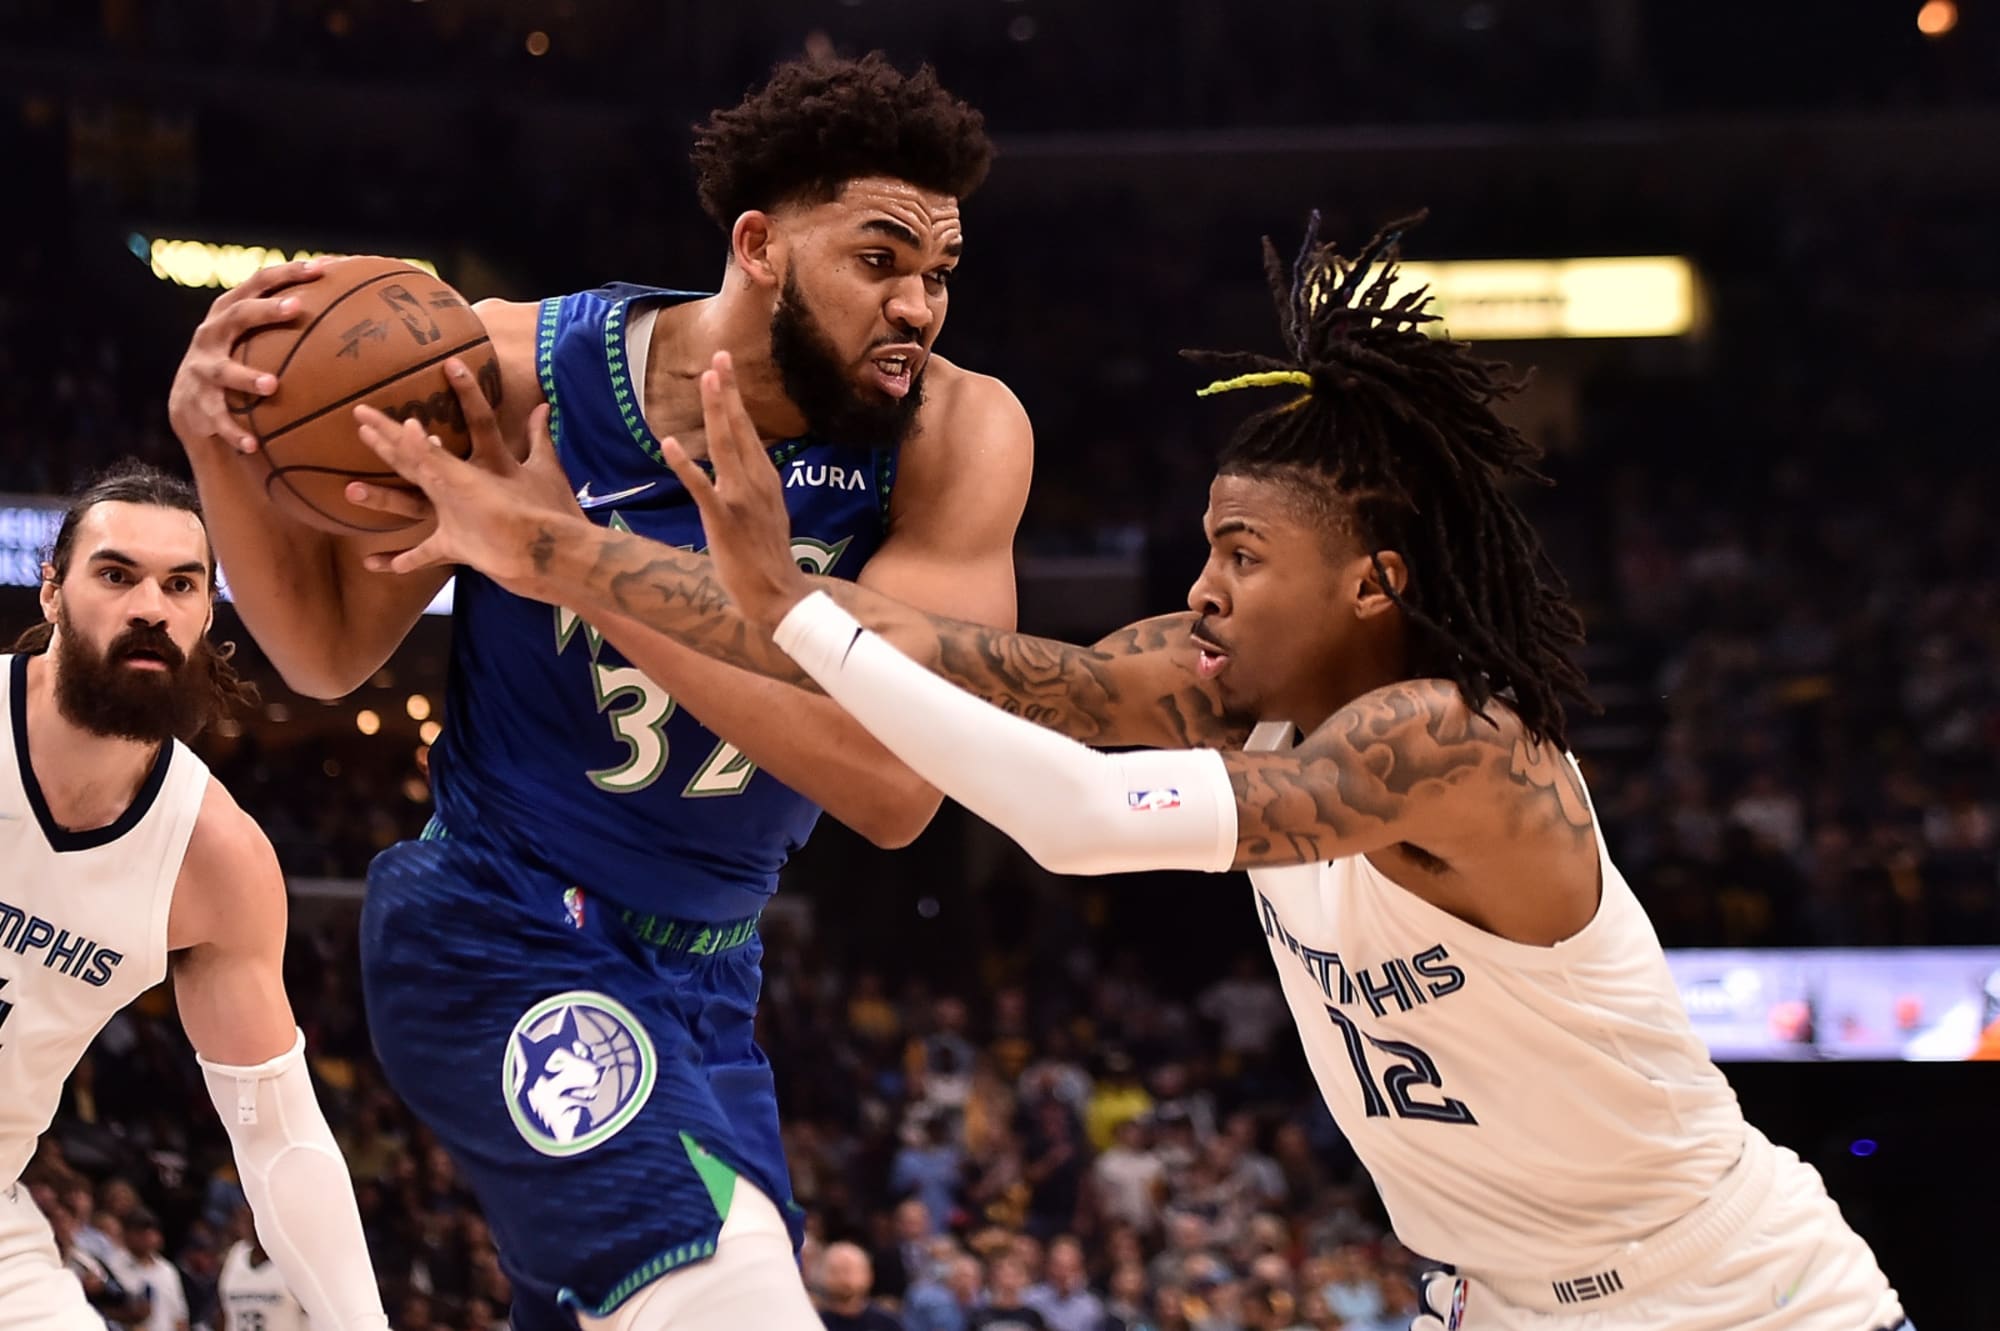 Timberwolves vs. Grizzlies live stream, TV channel, radio station, Game 2